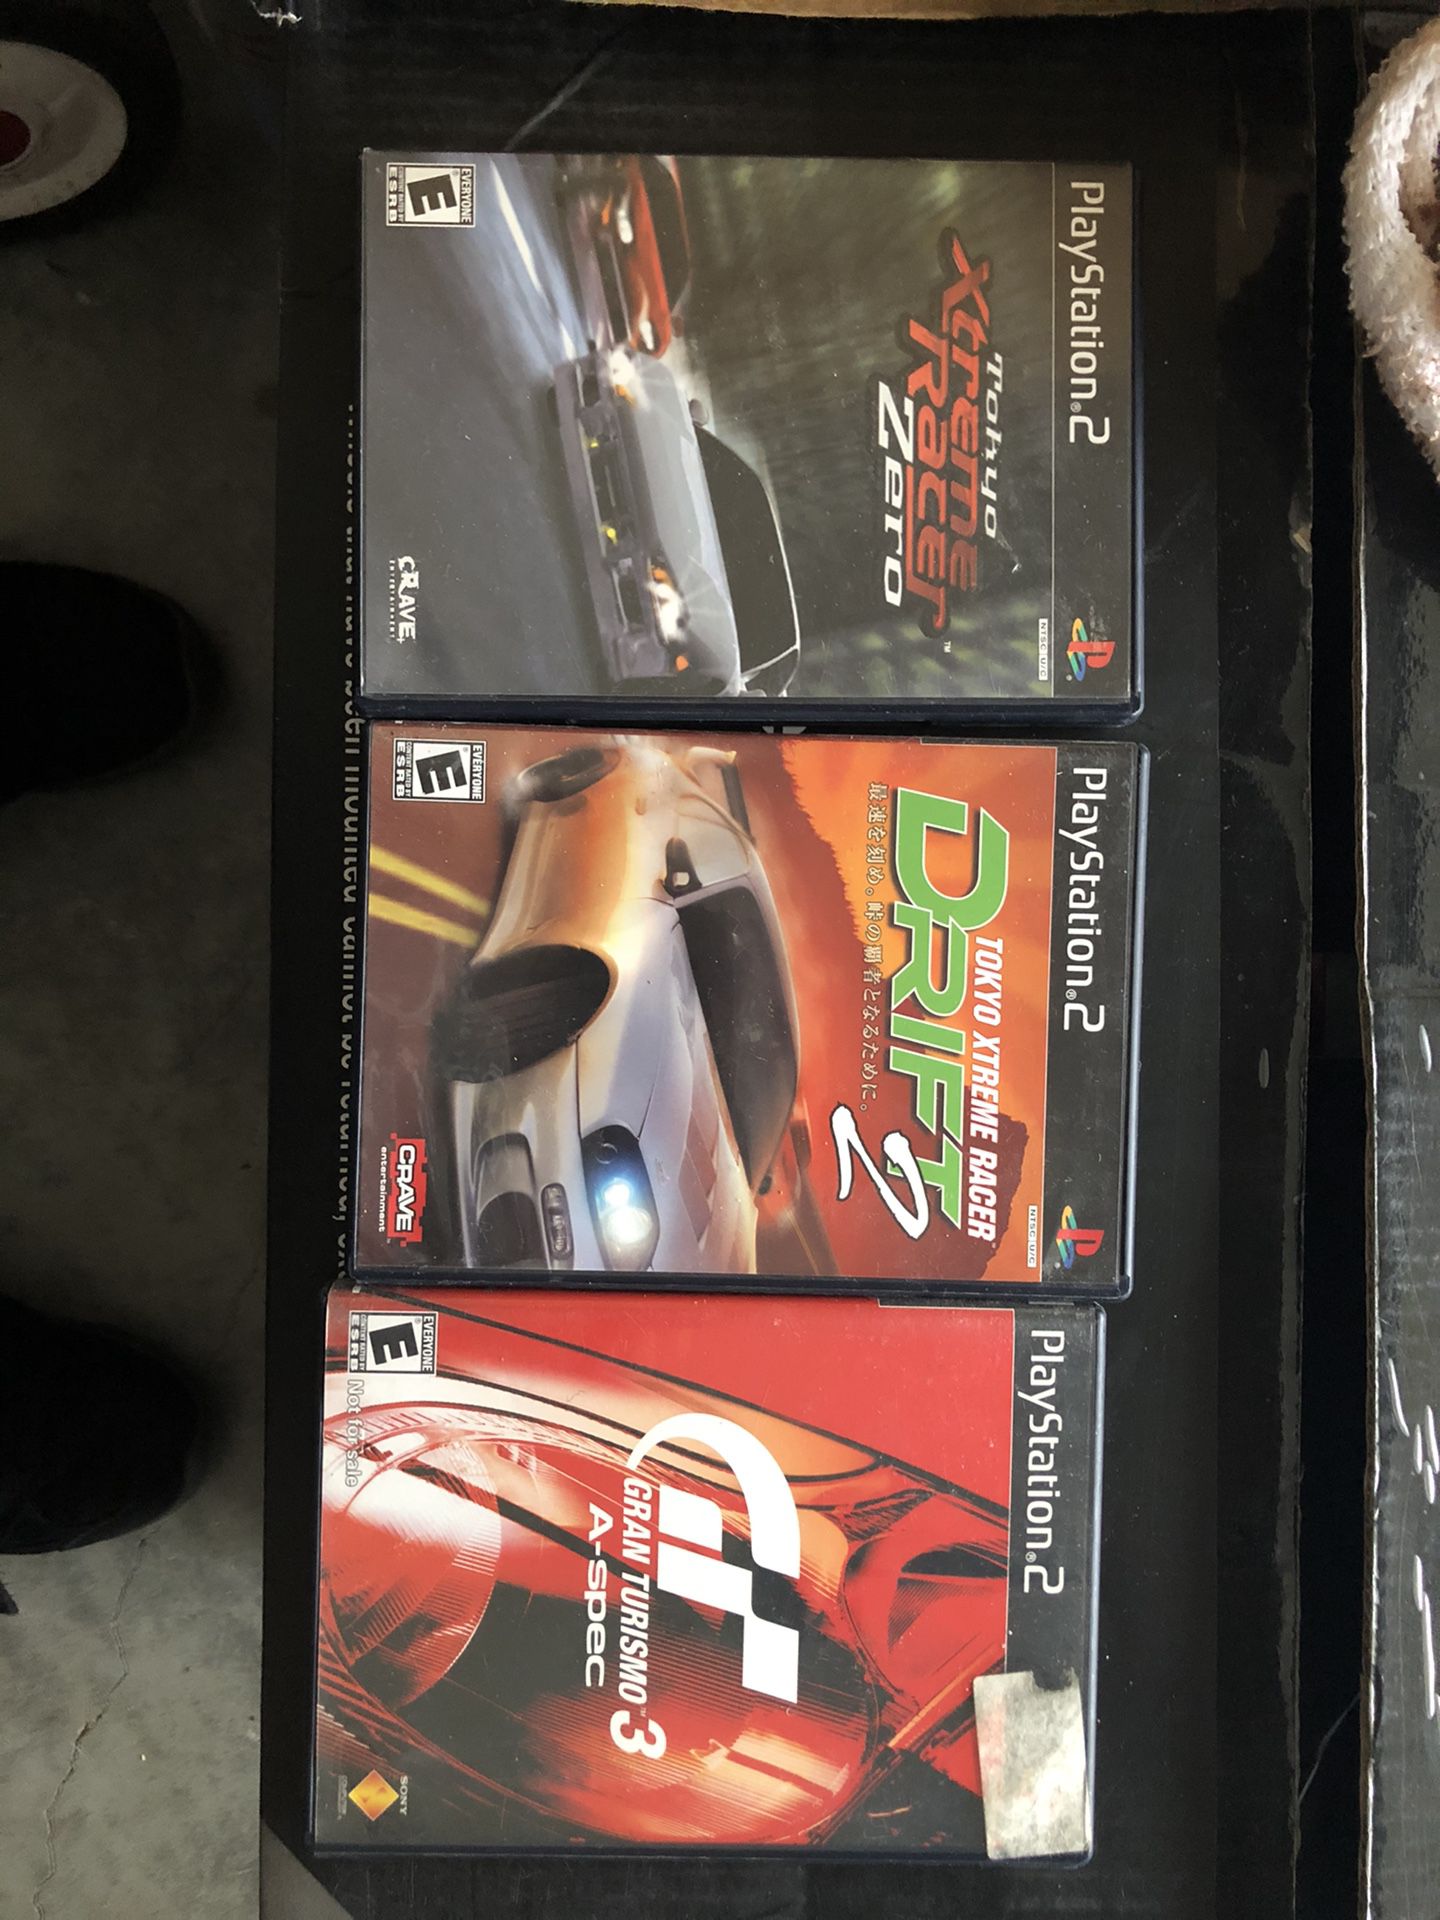 PS2 games and booklets